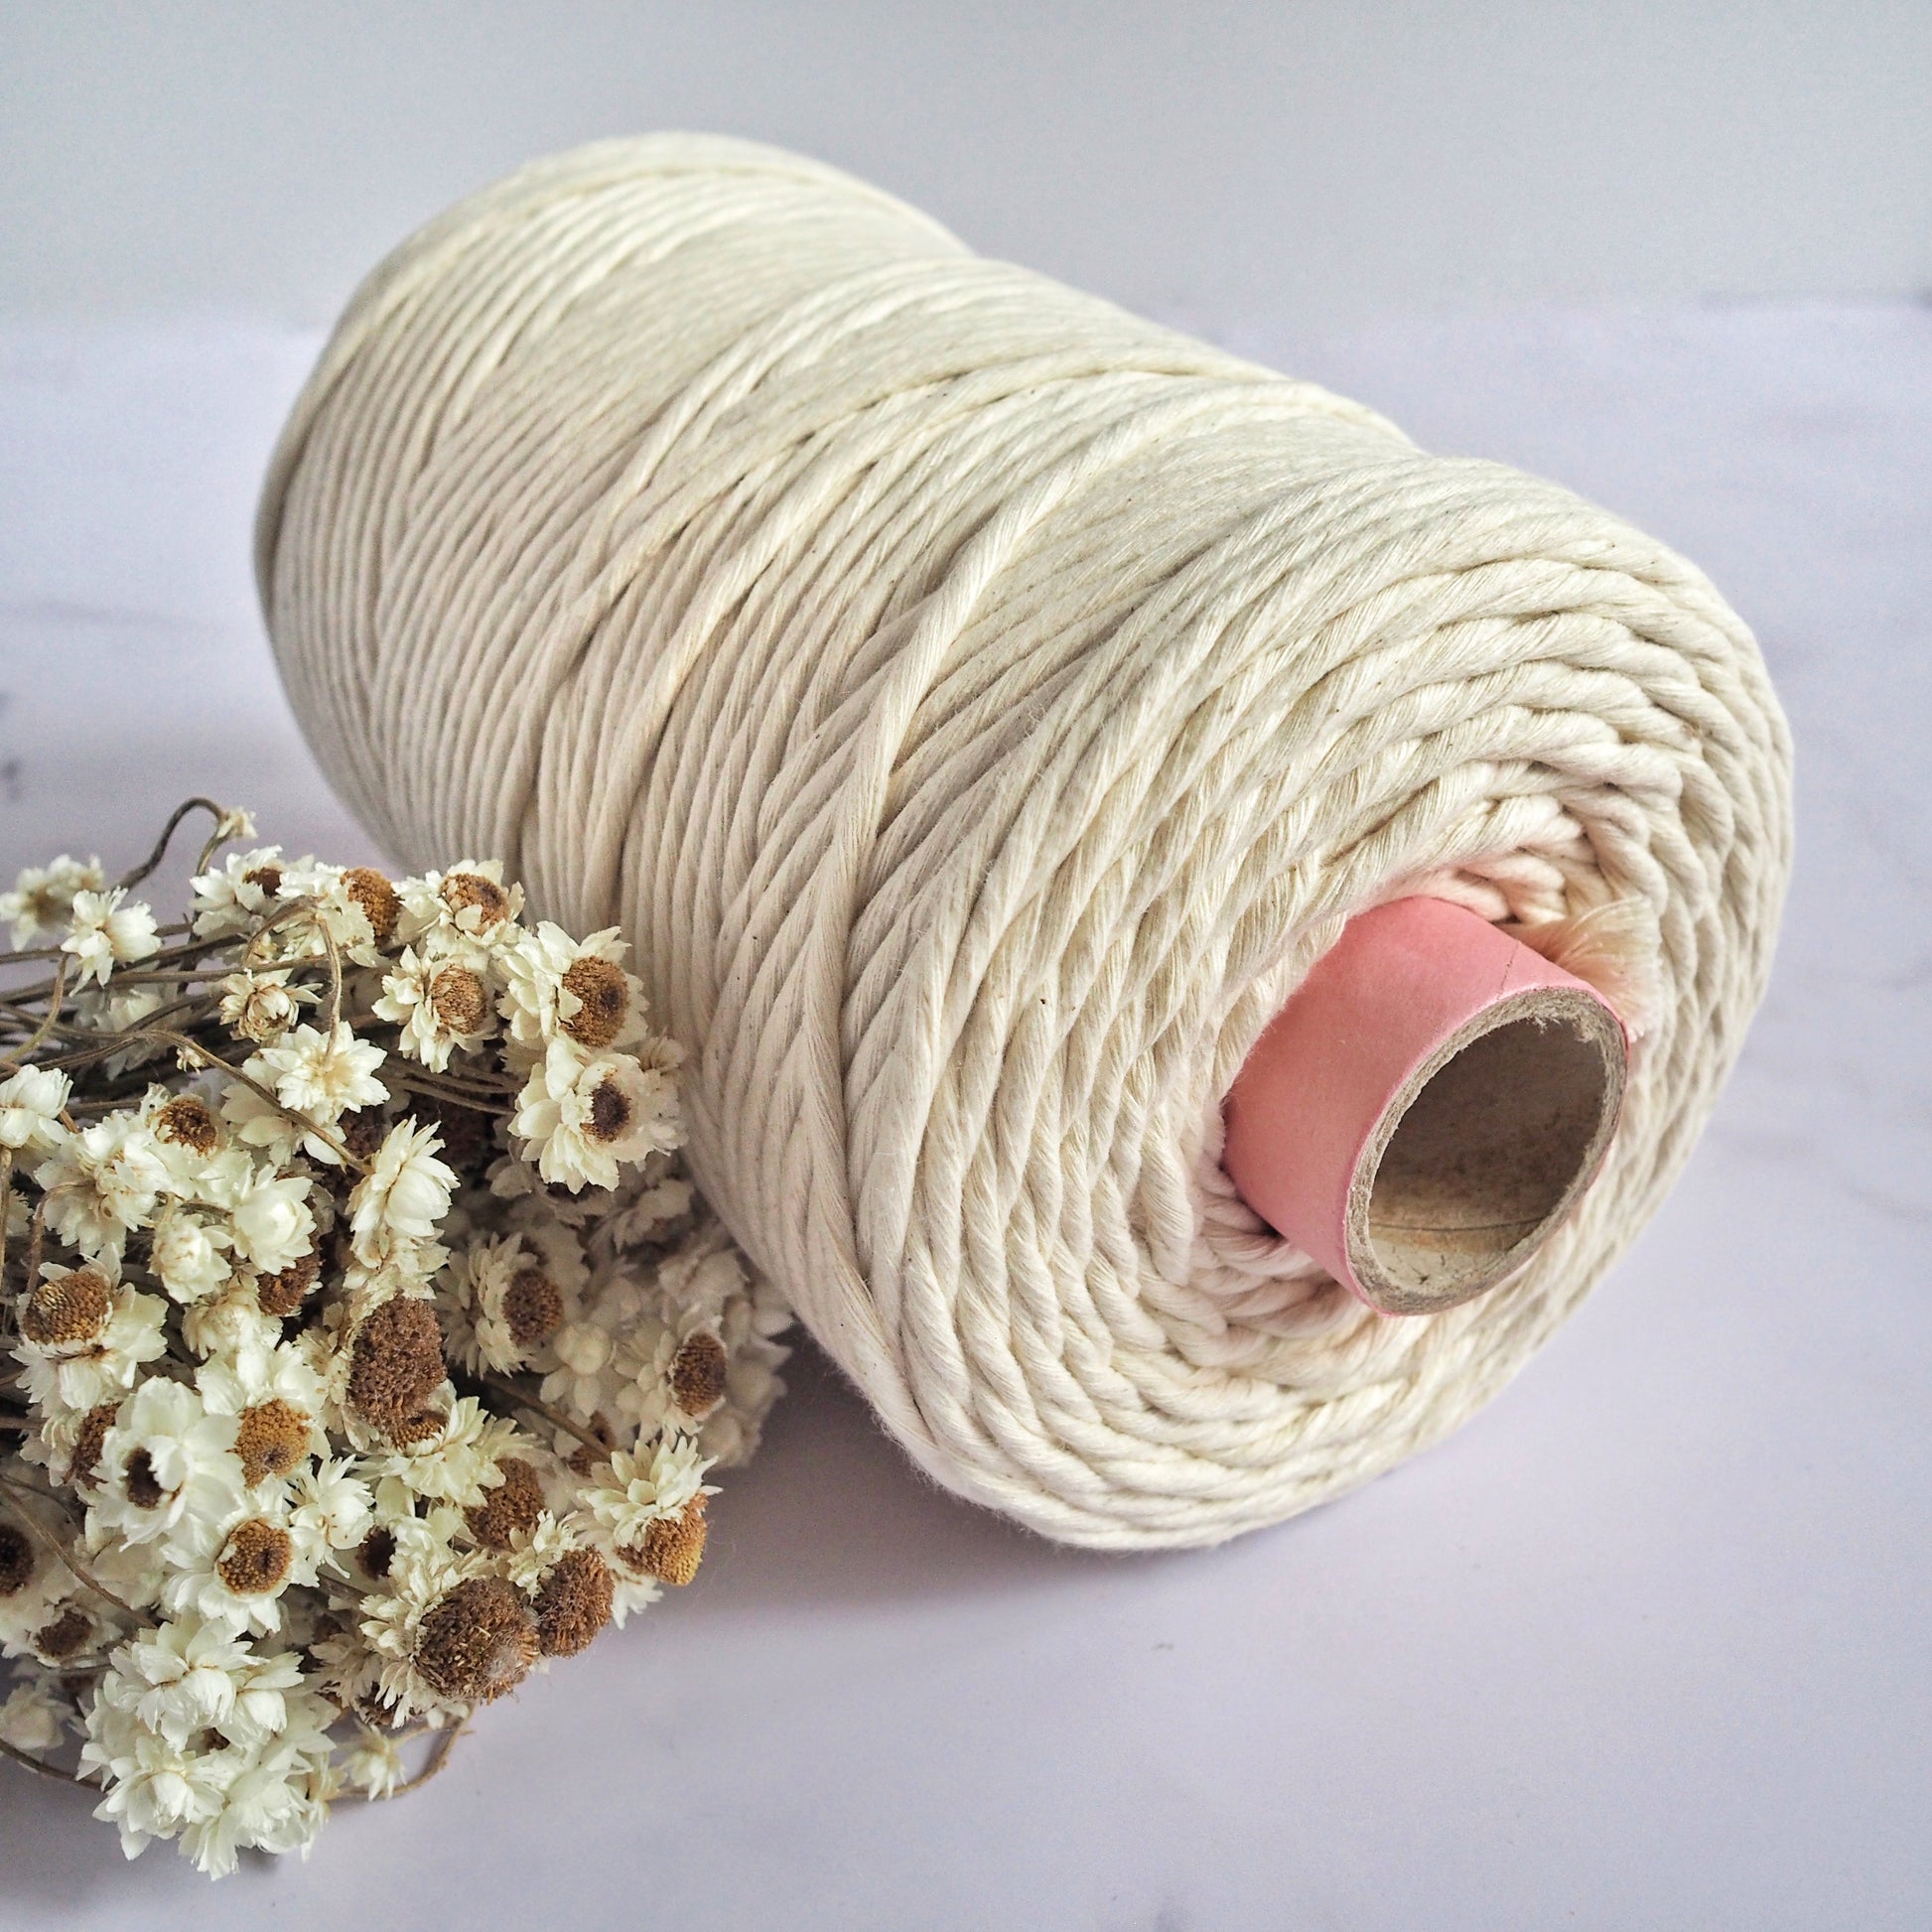 Natural | 5mm Recycled Cotton String - 1kg The Joyful Studio